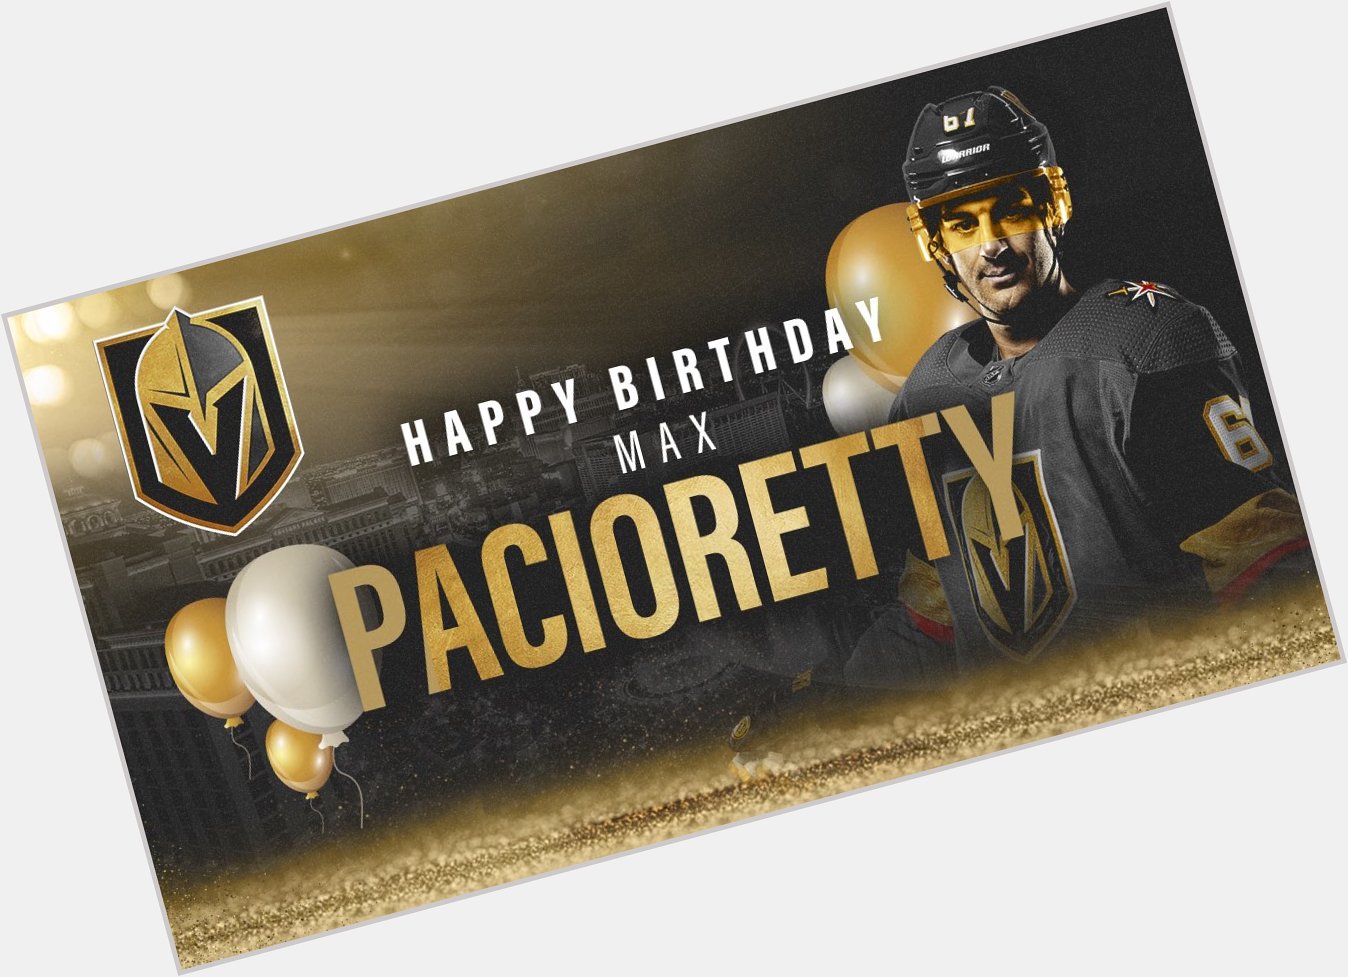 Don t forget to wish Max Pacioretty a happy birthday today! 